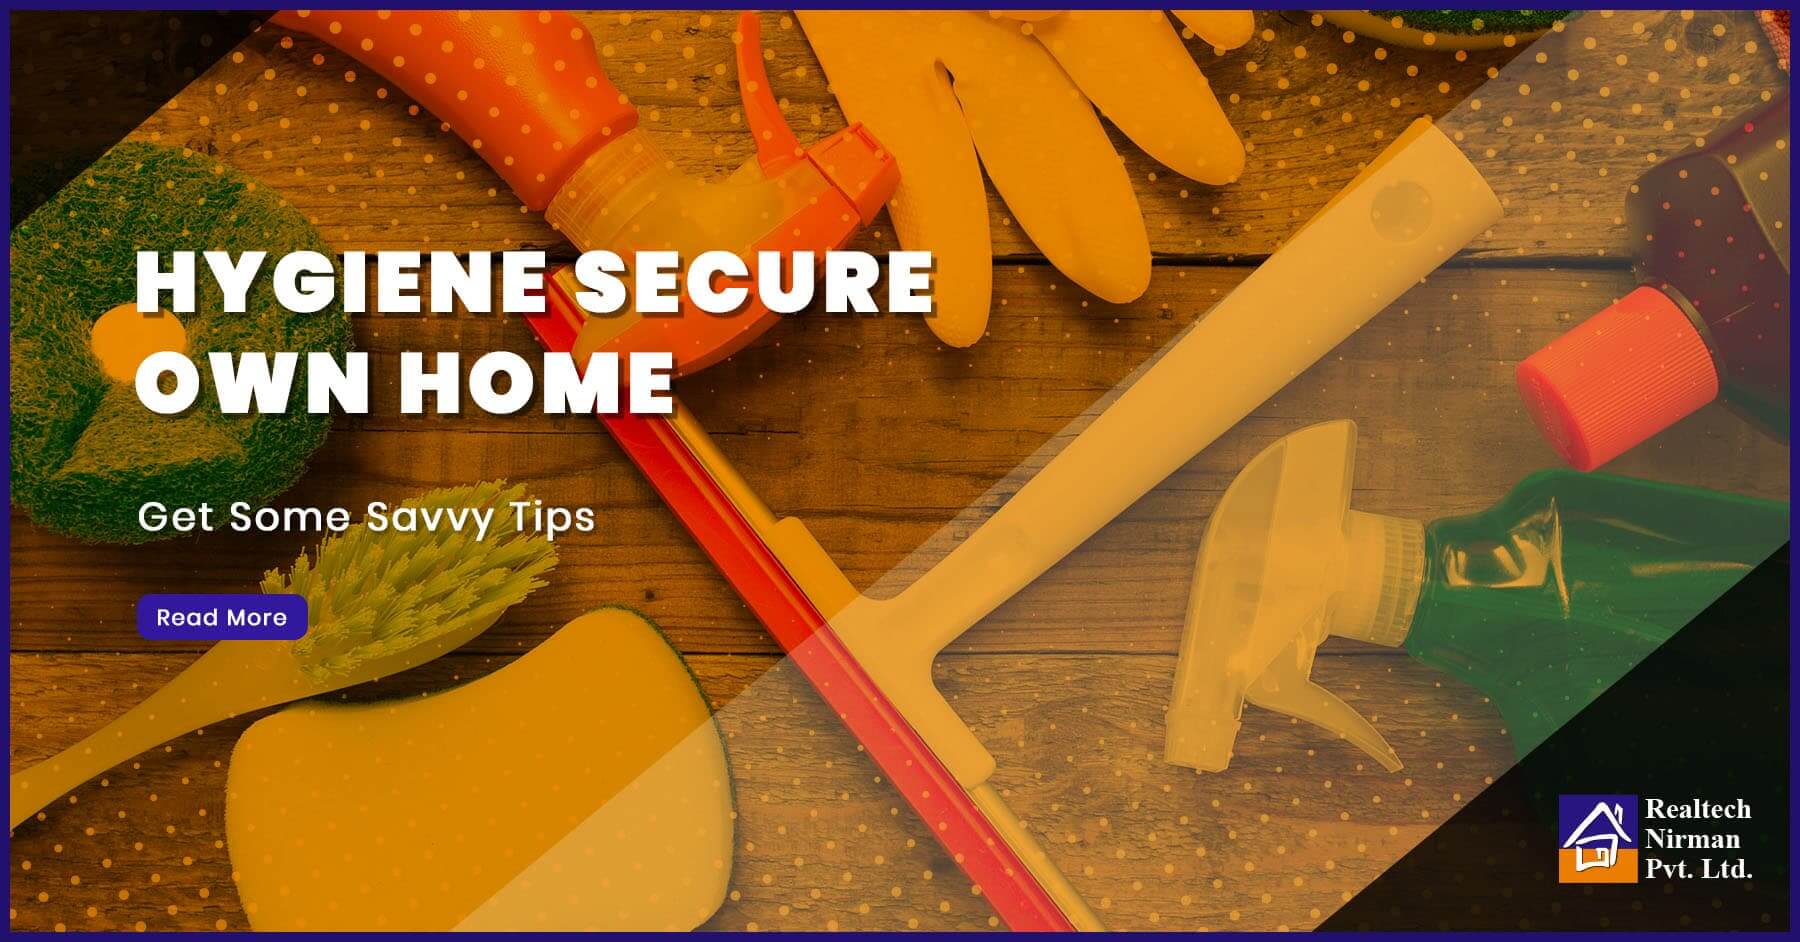 Smart Hacks To Keep Your Sweet Home Hygiene Perfect